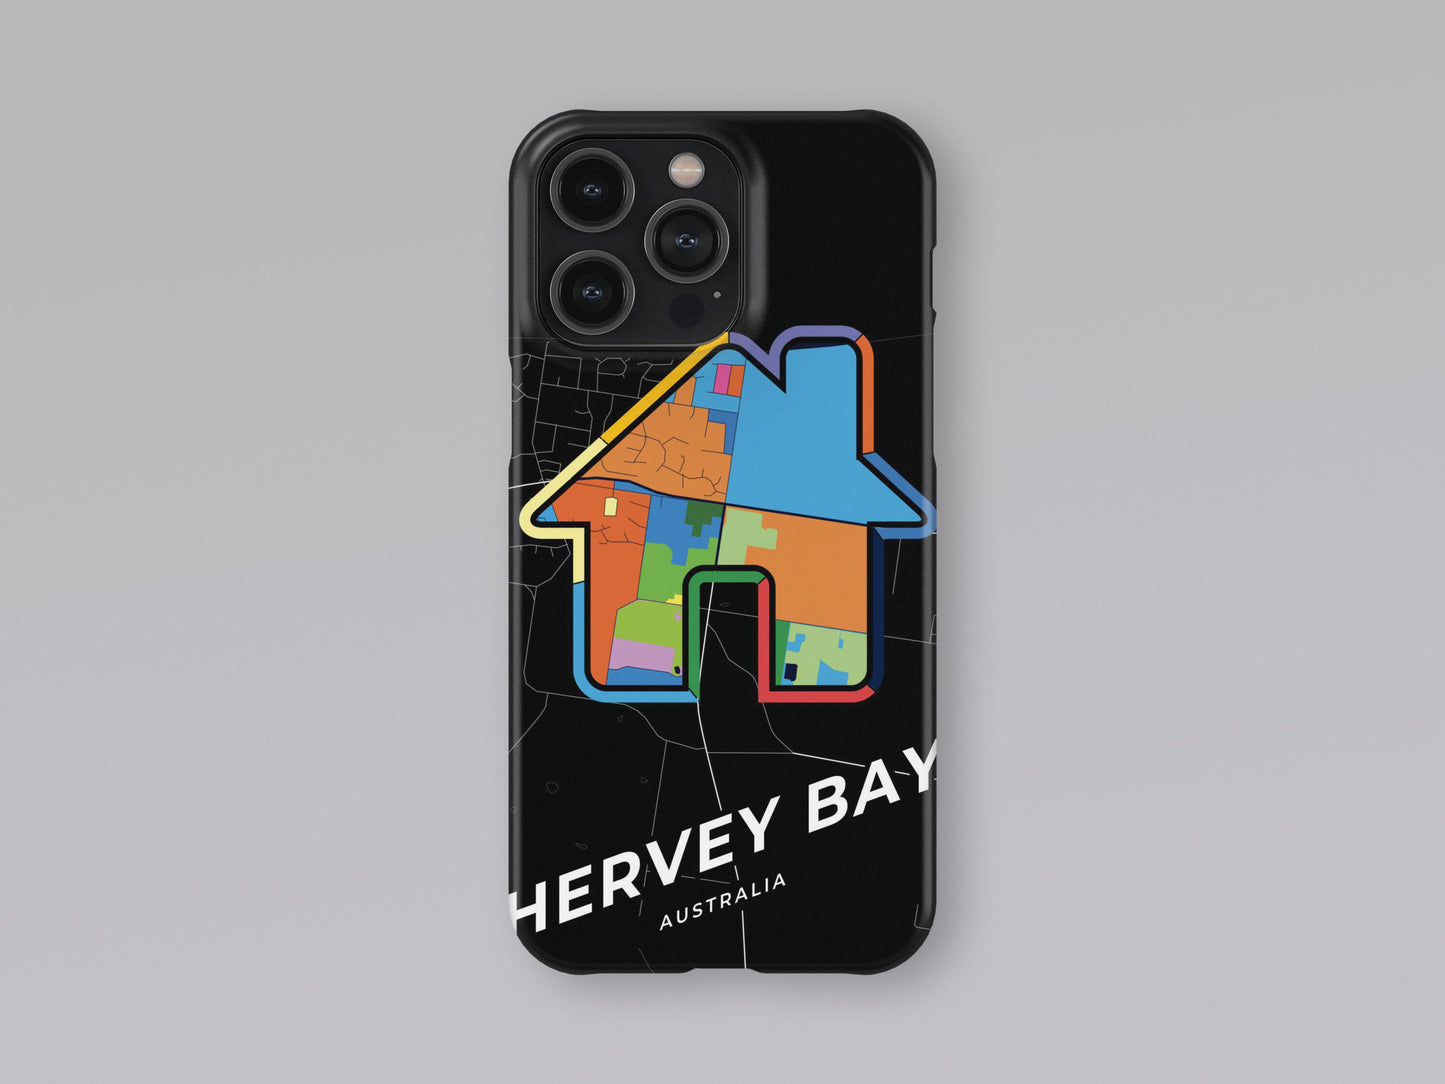 Hervey Bay Australia slim phone case with colorful icon. Birthday, wedding or housewarming gift. Couple match cases. 3